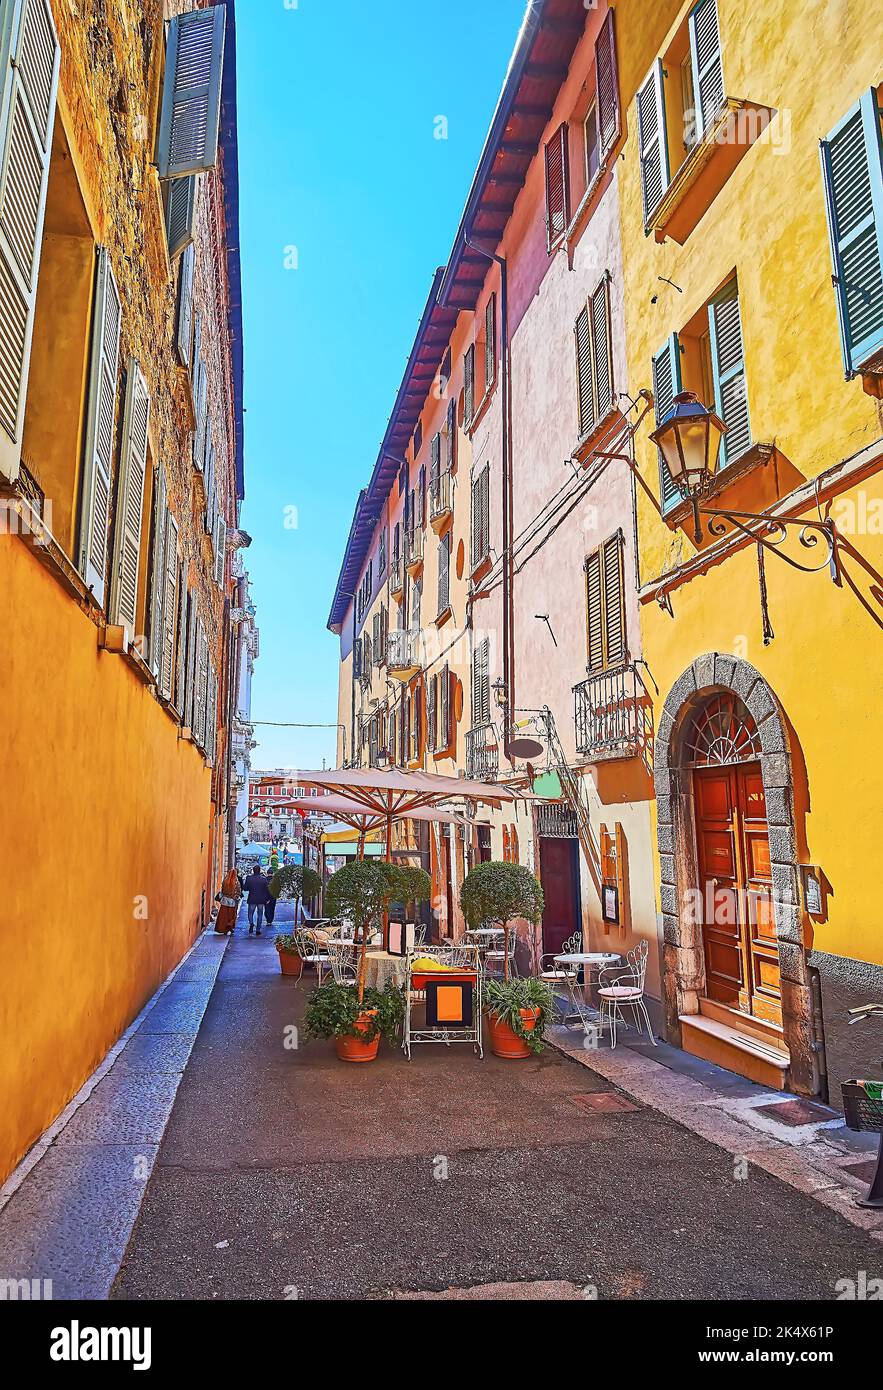 The narrow Vicolo Sant'Agostino street with historic houses and outdoor restaurants with tiny tables, sunshades and plants in pots, Brescia, Italy Stock Photo